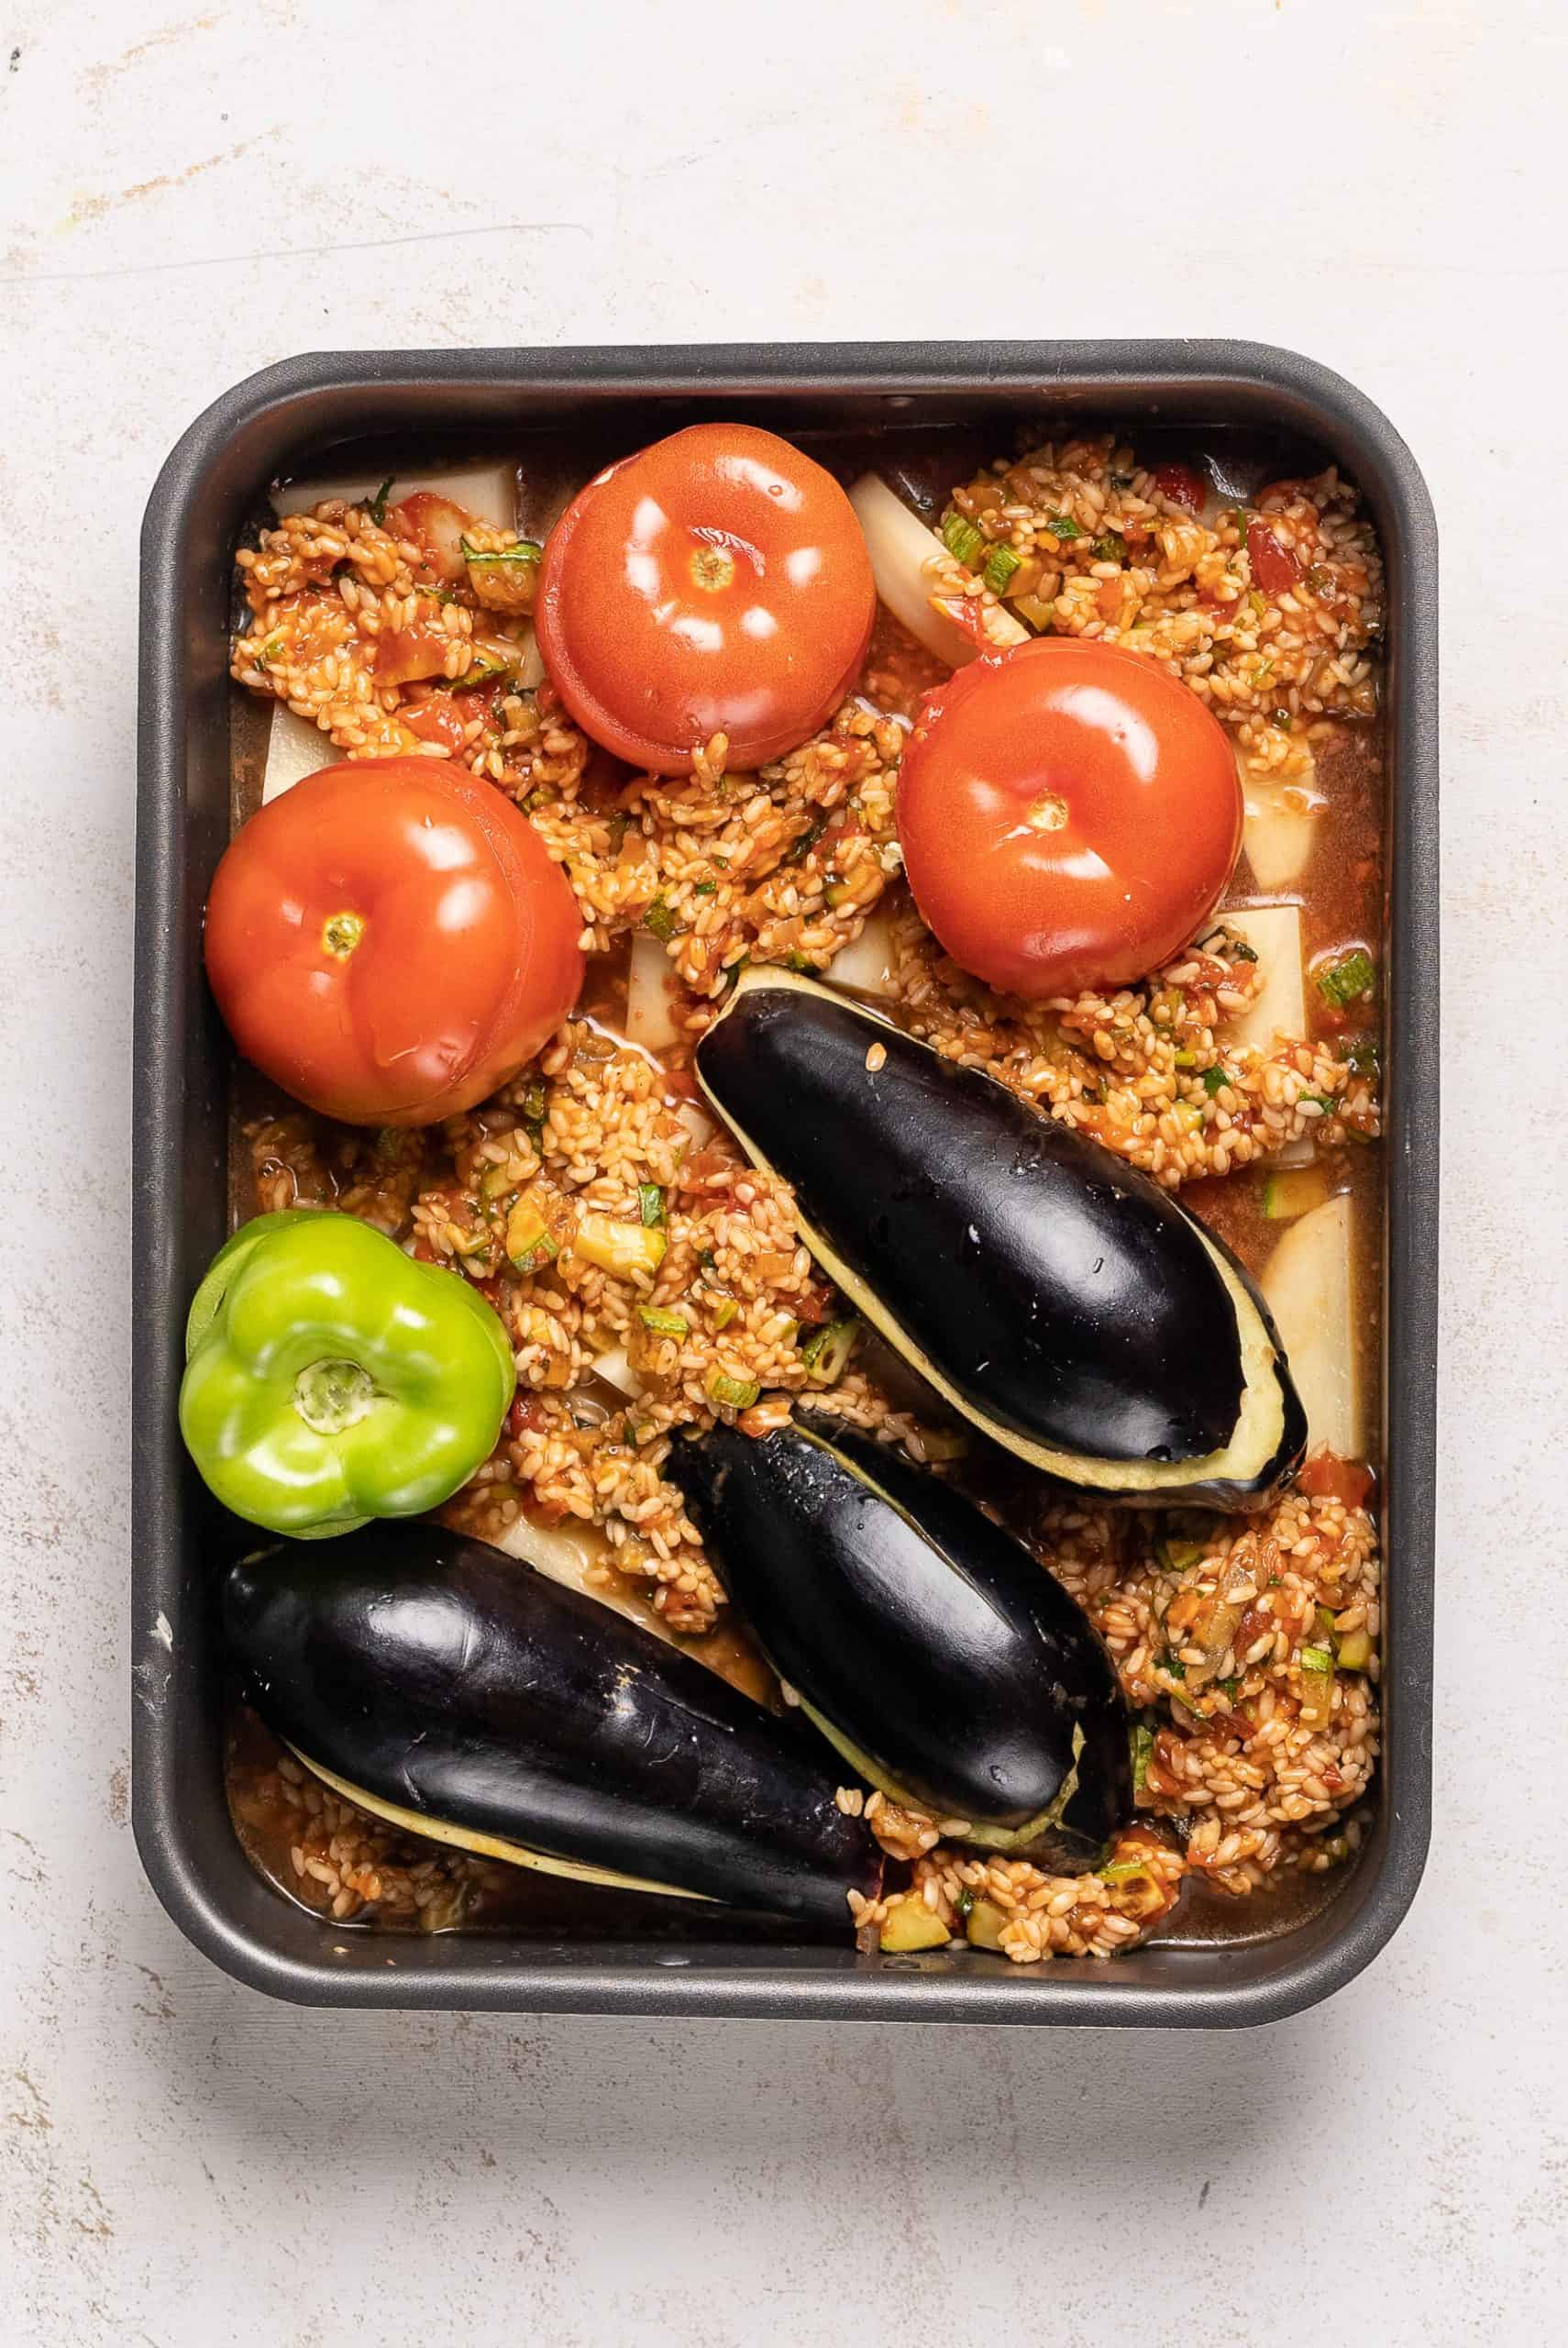 Gemista recipe (Greek Stuffed Tomatoes and Peppers with rice) - ready to bake